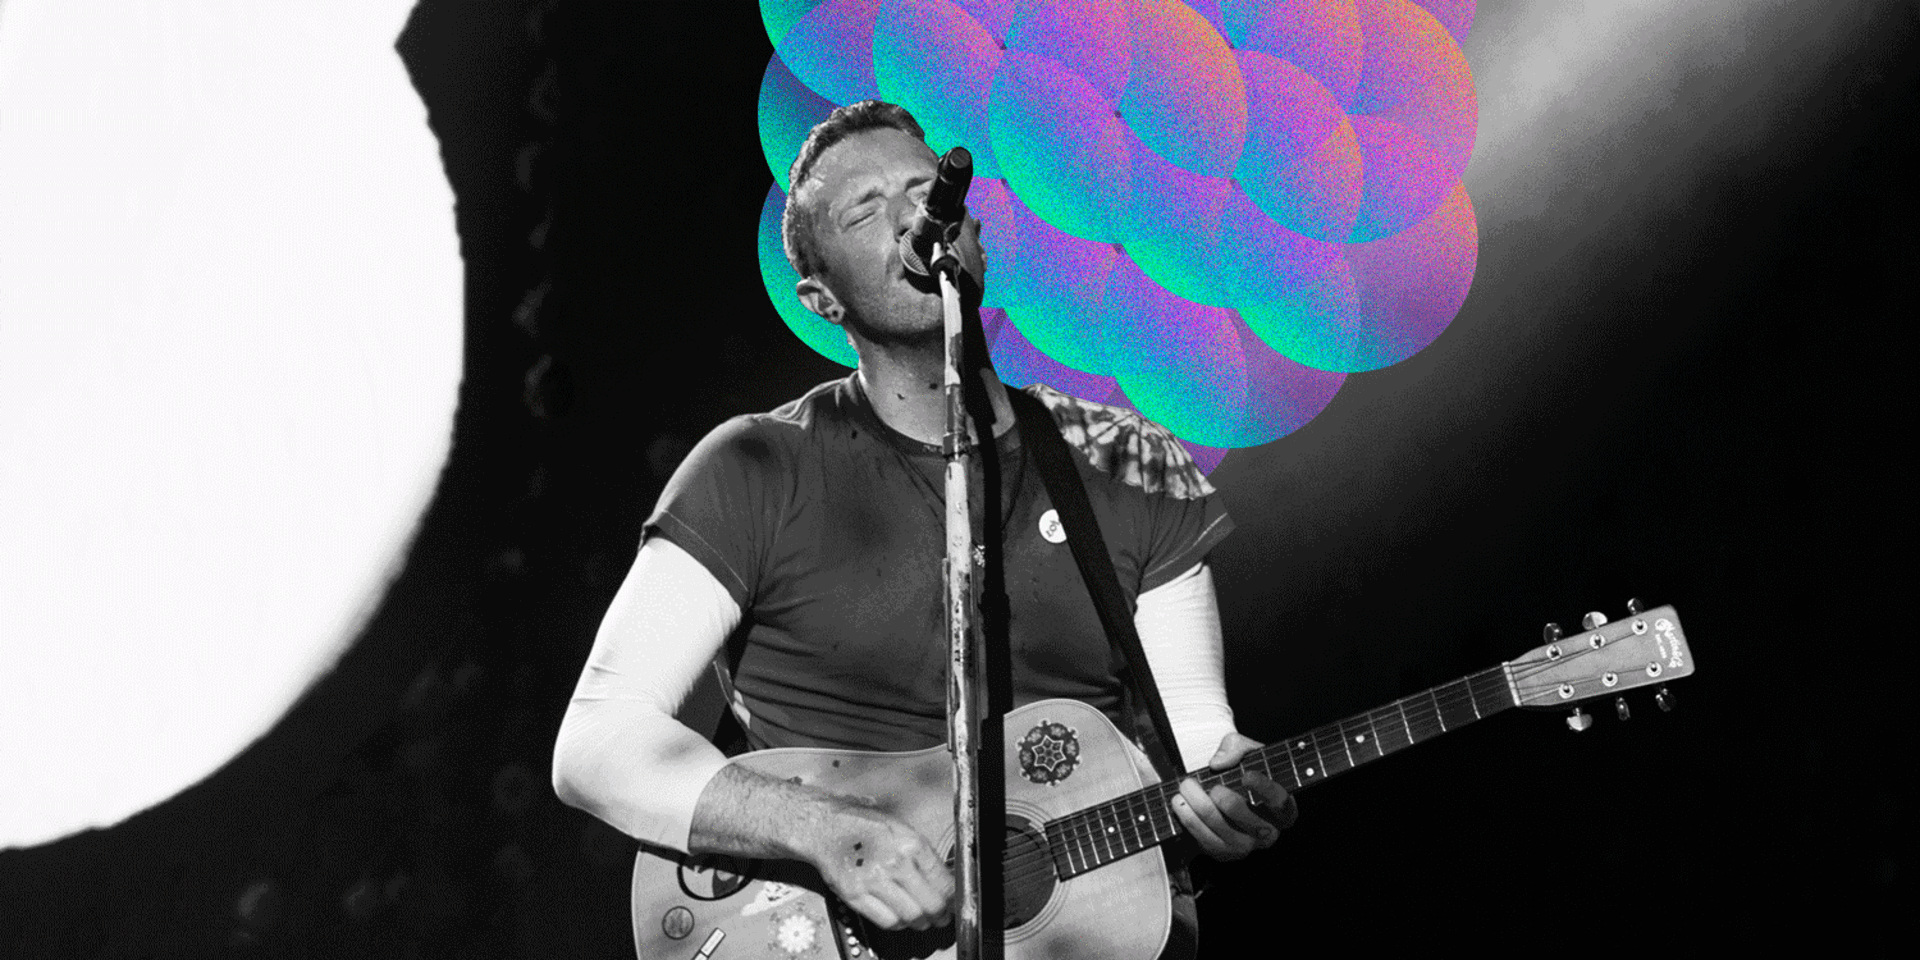 Coldplay's A Head Full of Dreams Asian Tour, as told by Filipino fans - Part II